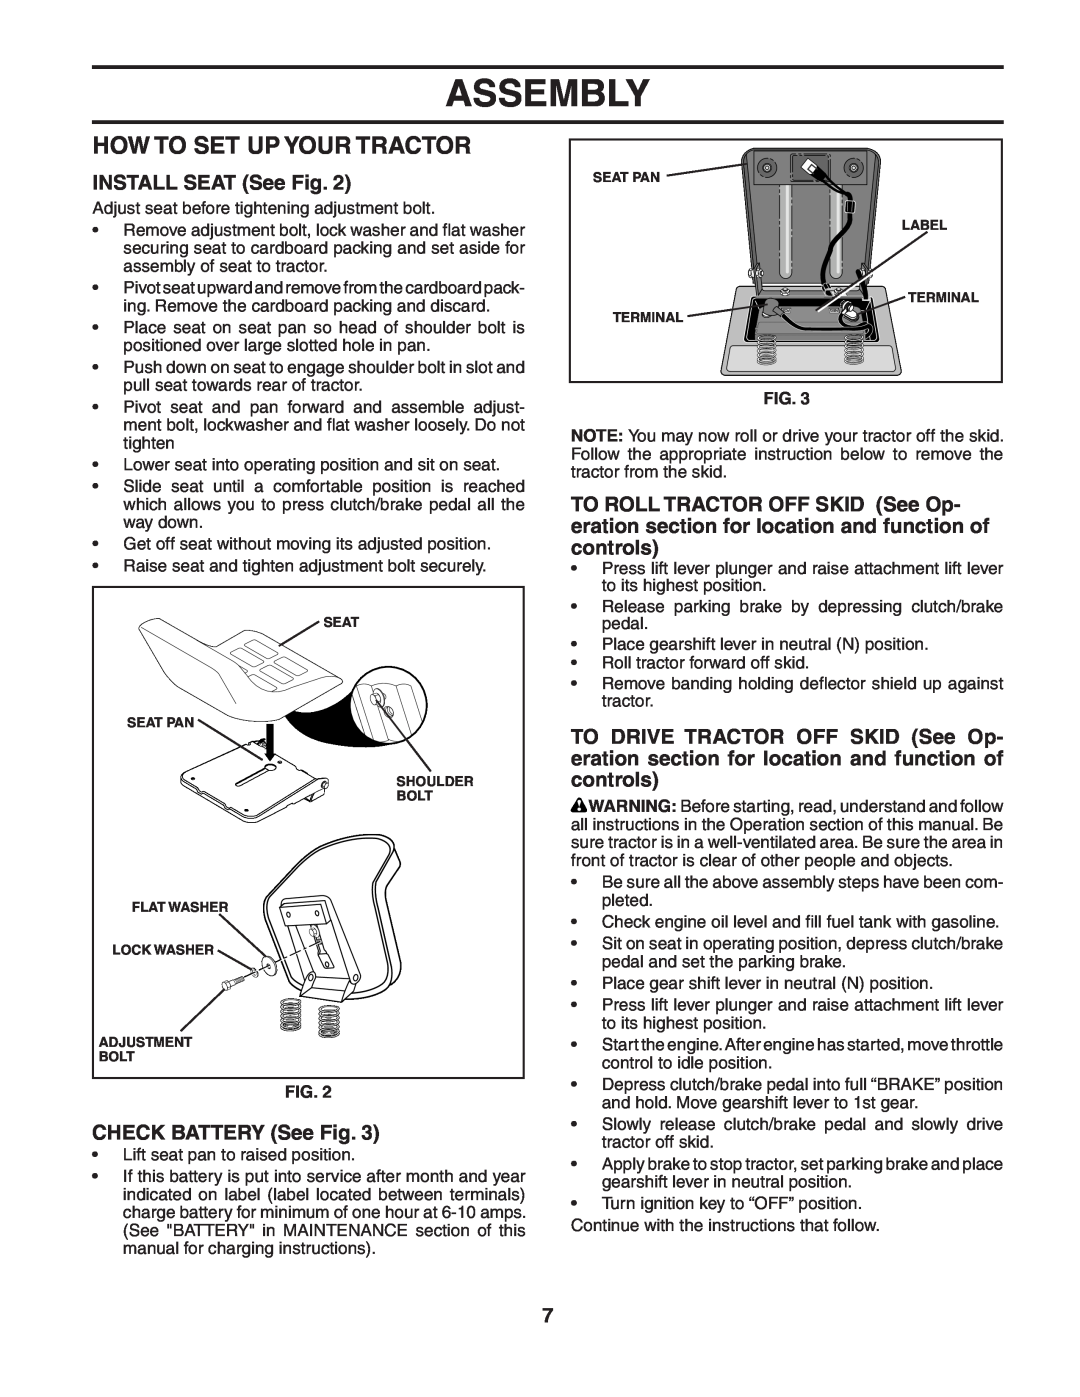 Poulan 188870 manual How To Set Up Your Tractor, INSTALL SEAT See Fig, CHECK BATTERY See Fig, Assembly 